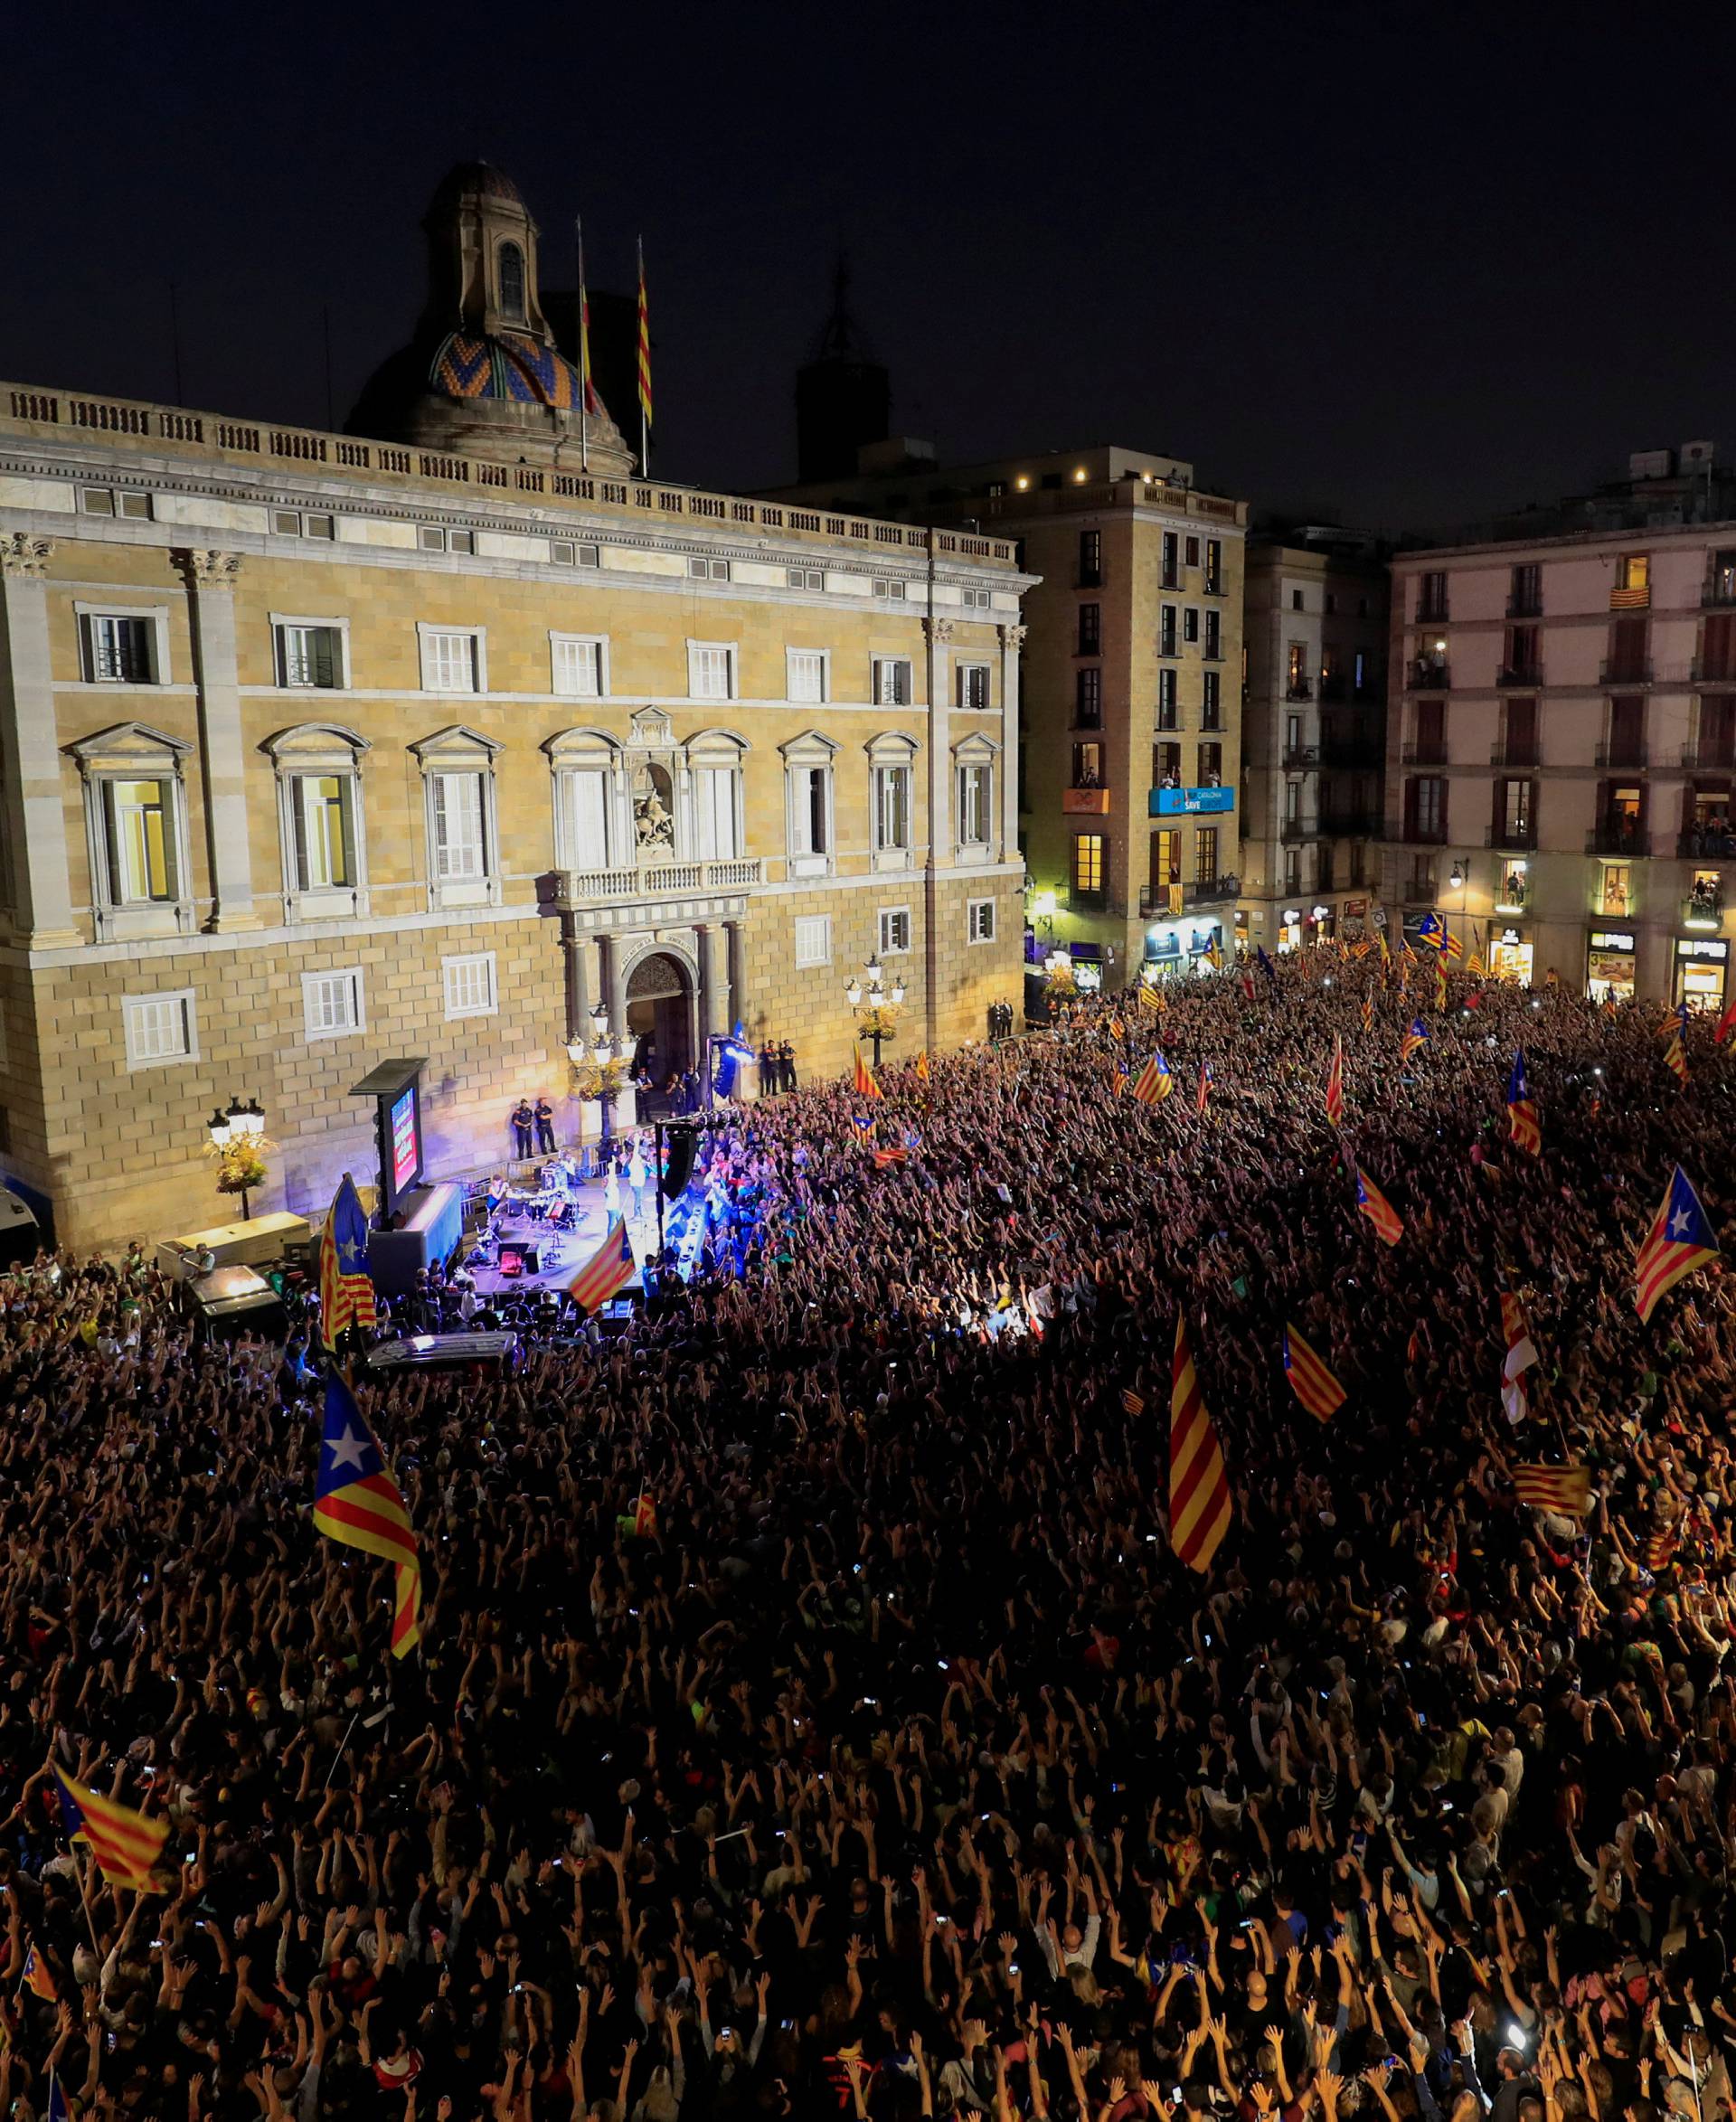 People raise arms as they gather during celebrations in Sant Jaume square after the Catalan regional parliament declared independence from Spain in Barcelona